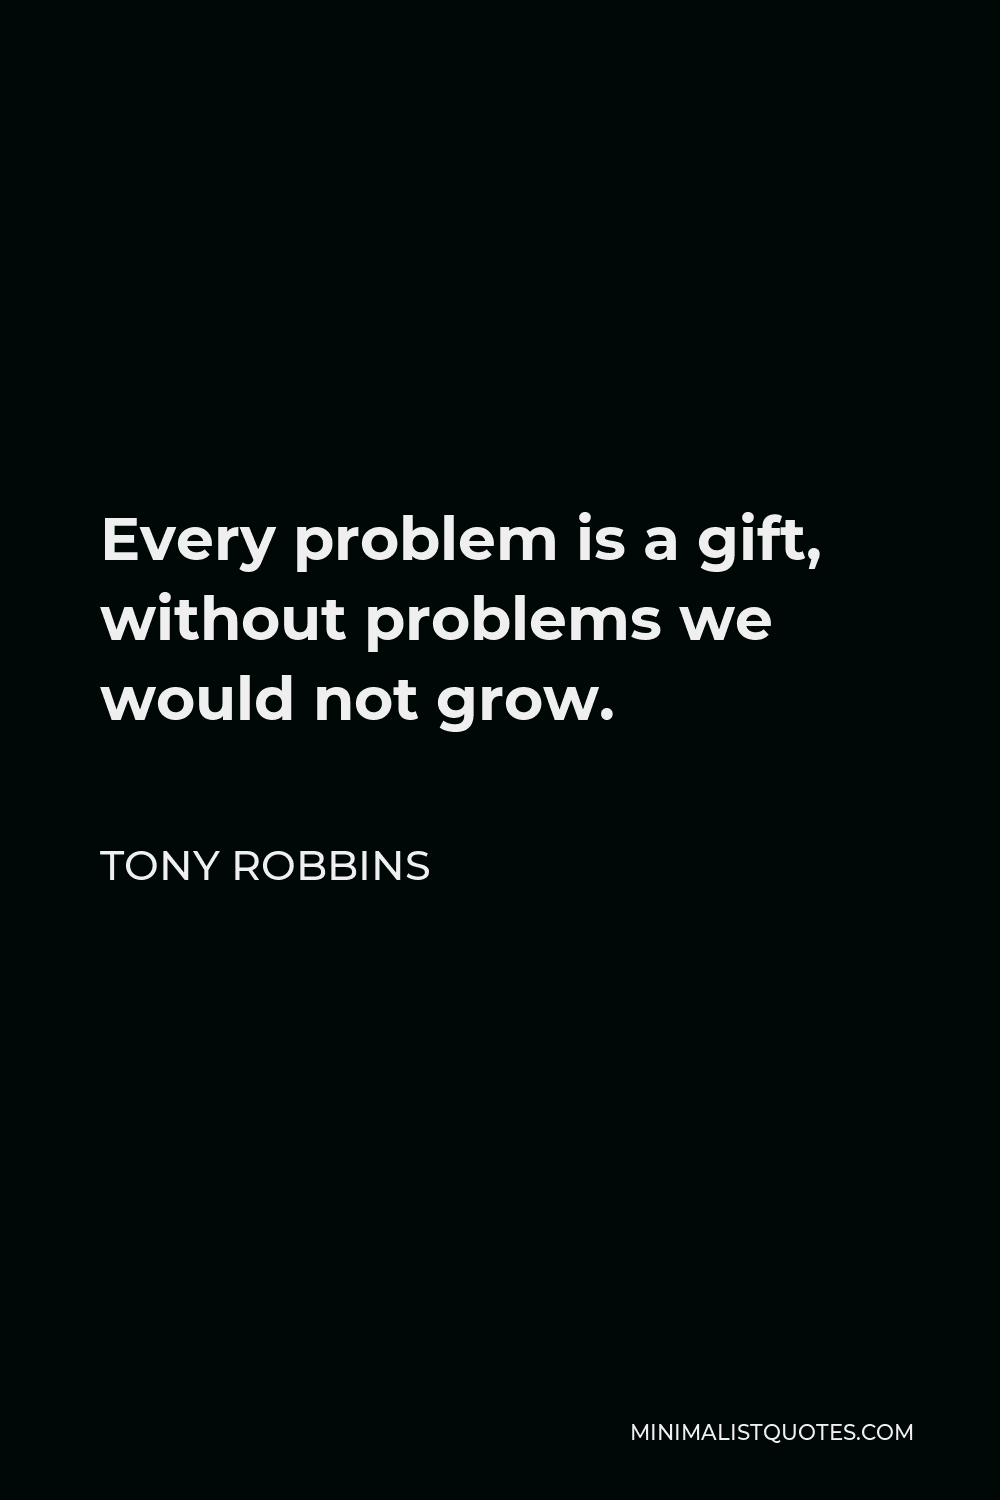 Tony Robbins Quote - Every problem is a gift, without problems we would not grow.